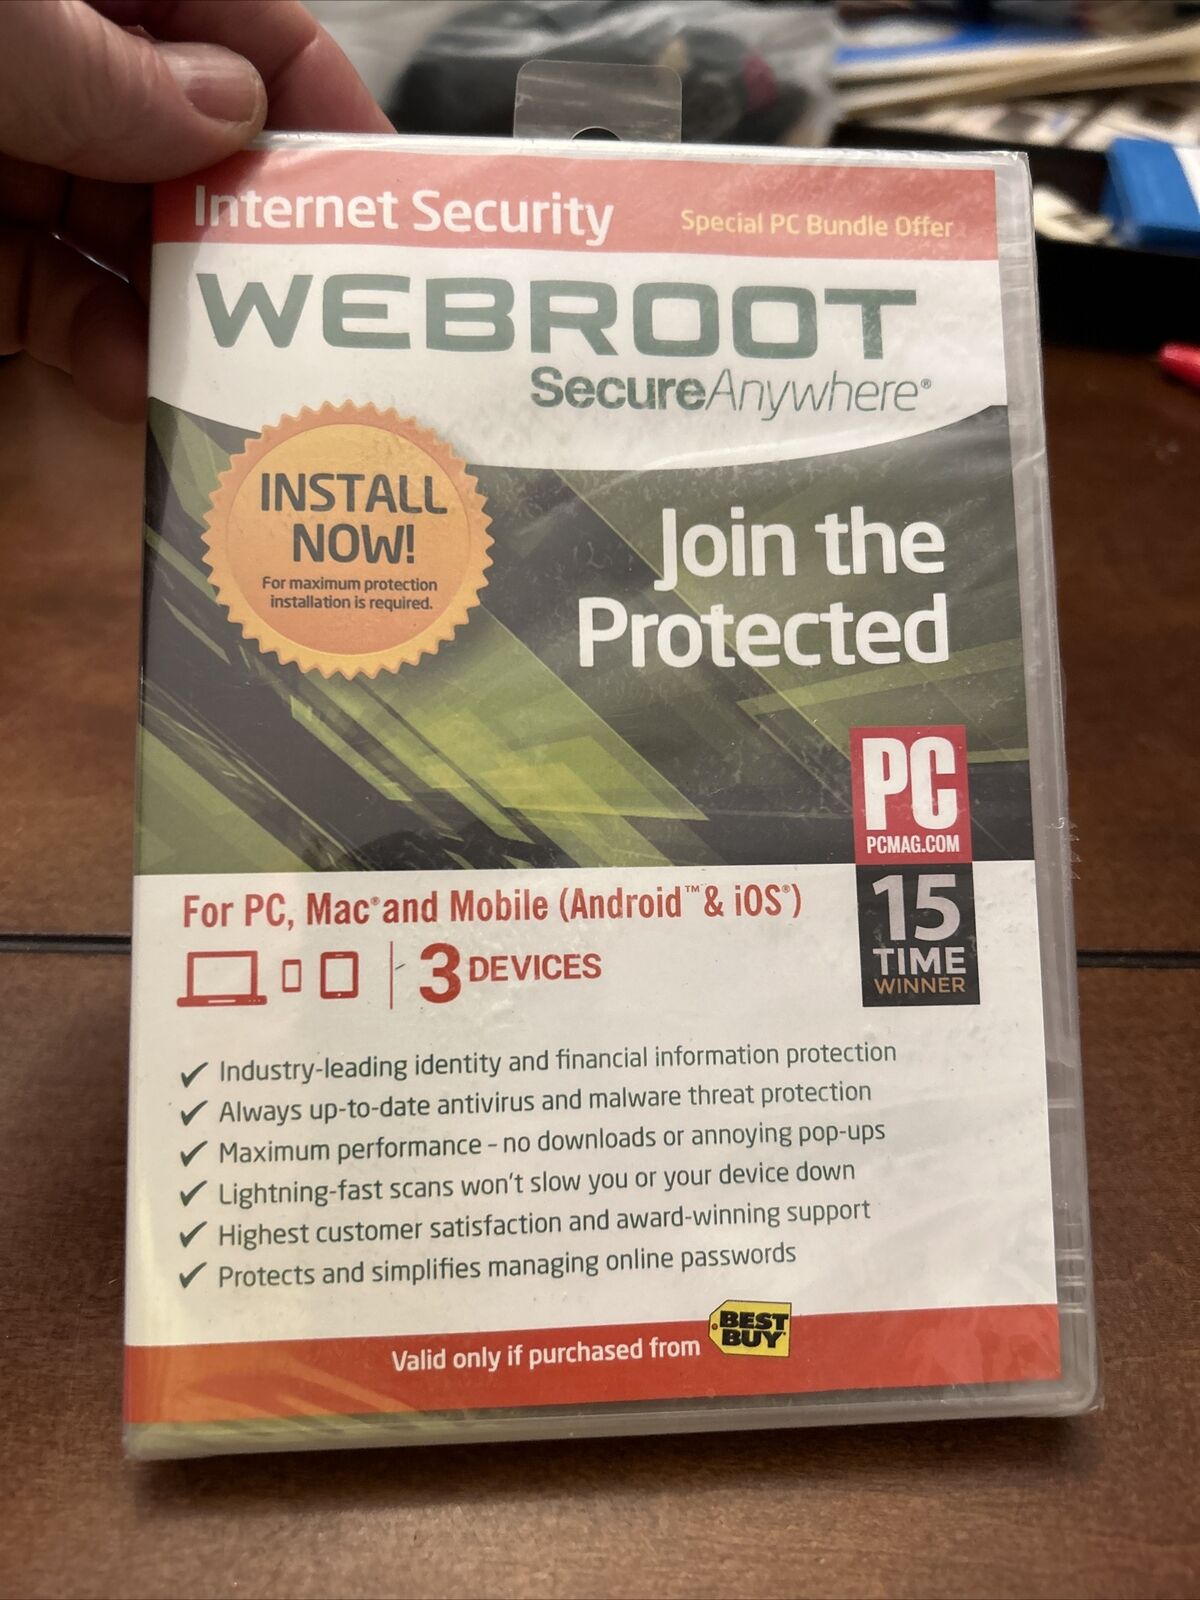 New NOS Webroot Secure Anywhere Internet Security 3 Devices for PC/MAC/Mobile